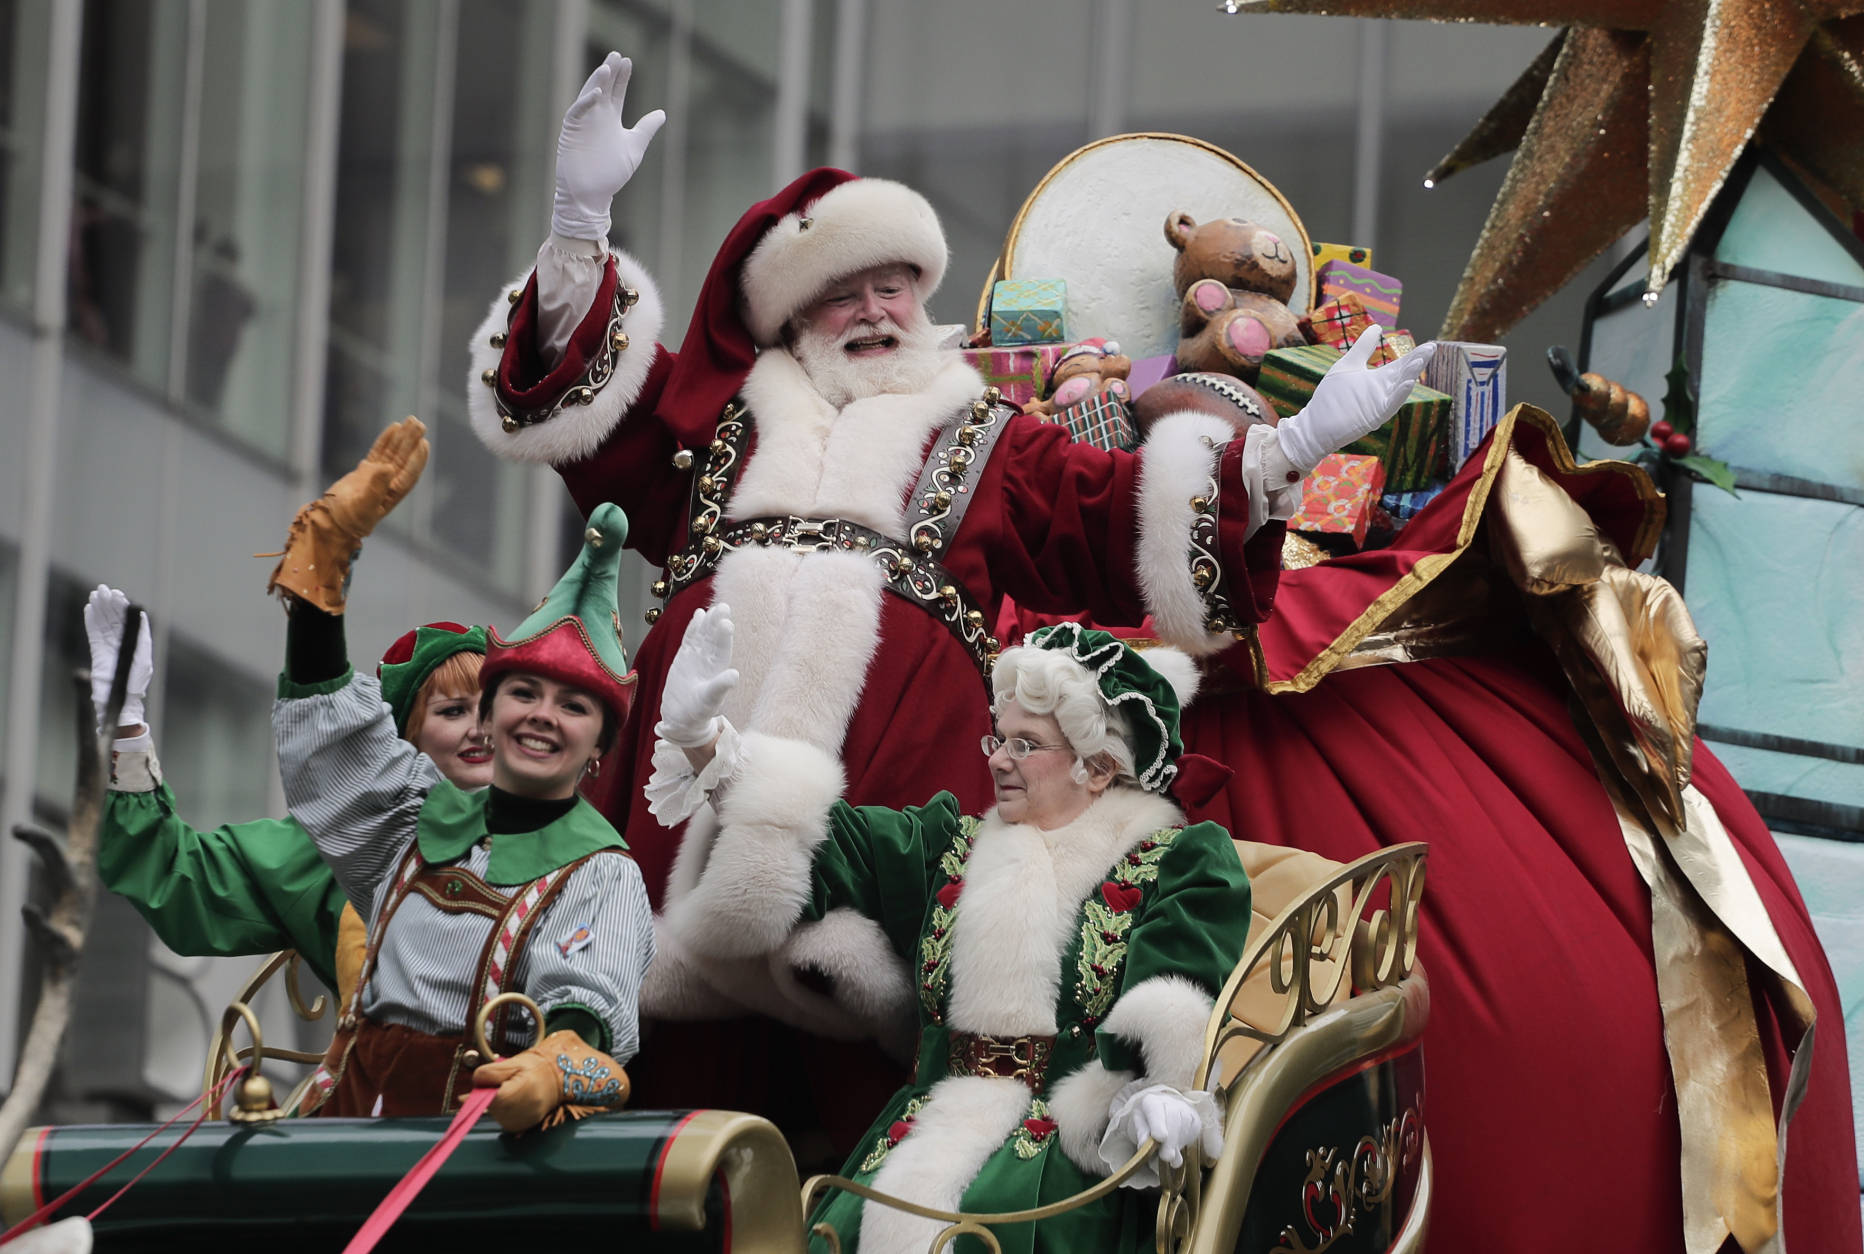 Santa Claus waves from his float as he passes along Sixth Avenue during the Macy's Thanksgiving Day parade, Thursday, Nov. 24, 2016, in New York. (AP Photo/Julie Jacobson)